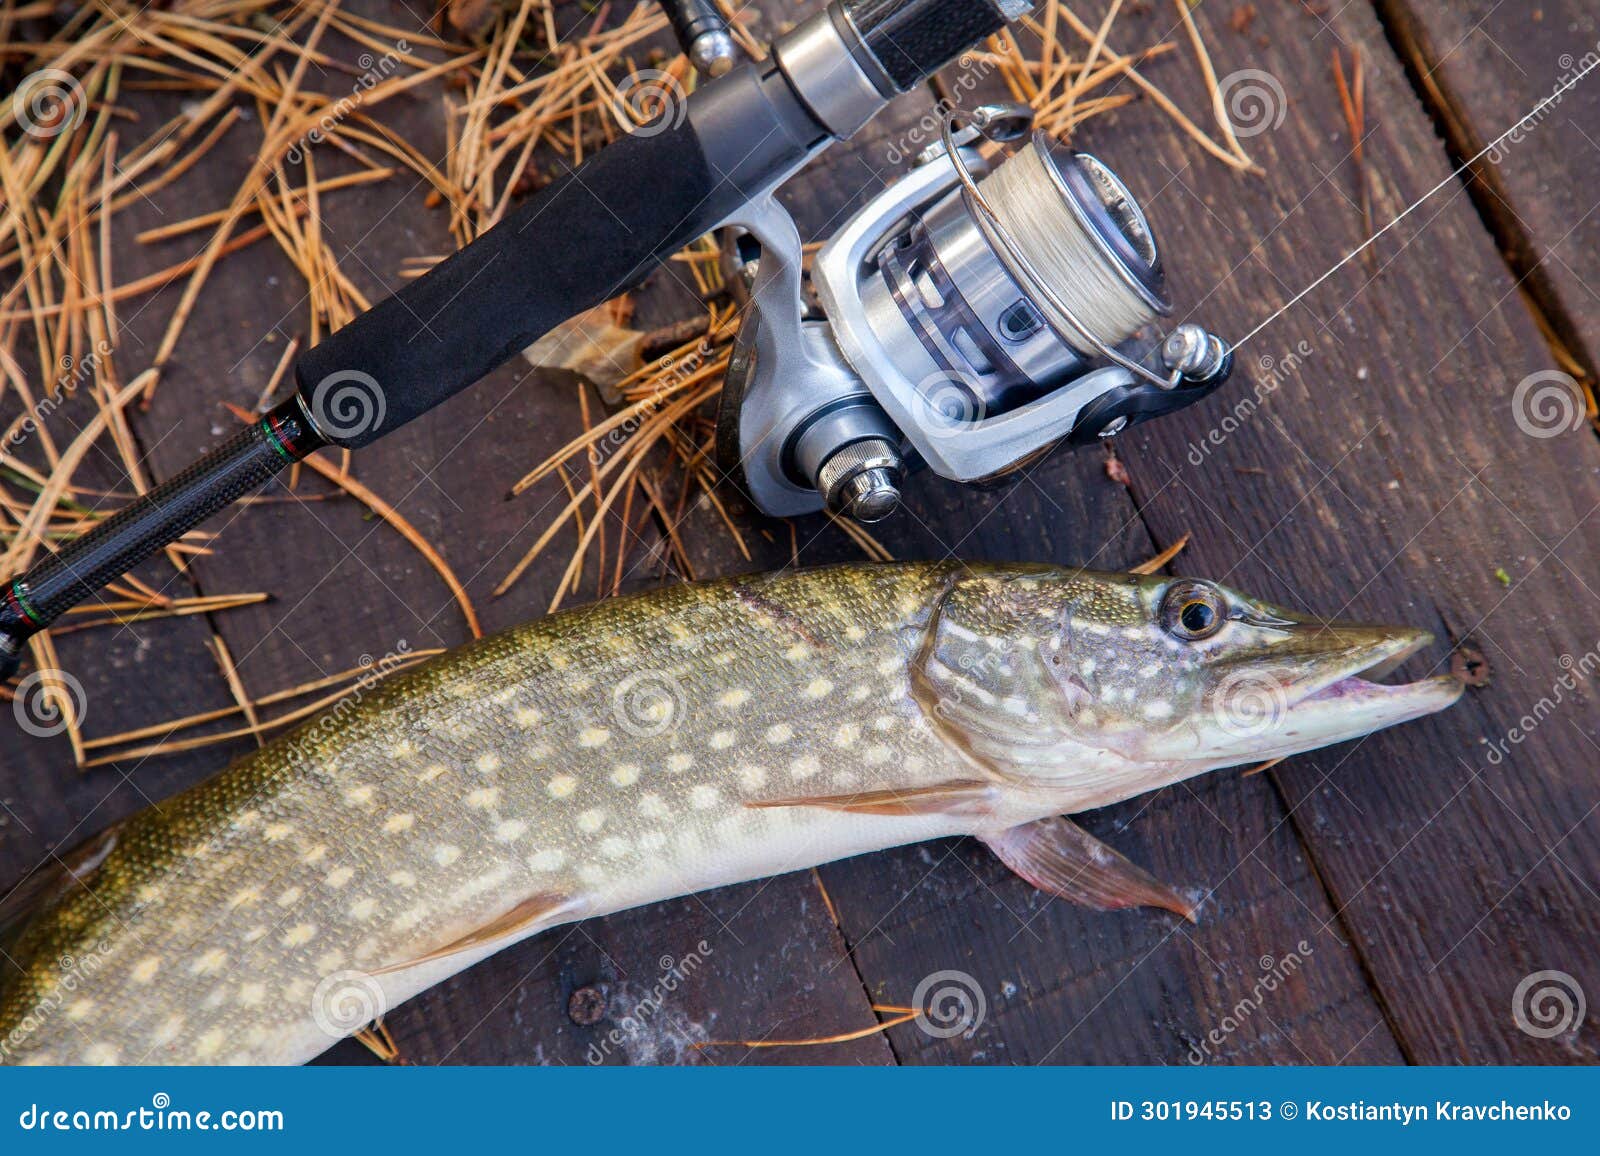 Freshwater Pike and Fishing Equipment Lies on Wooden Background